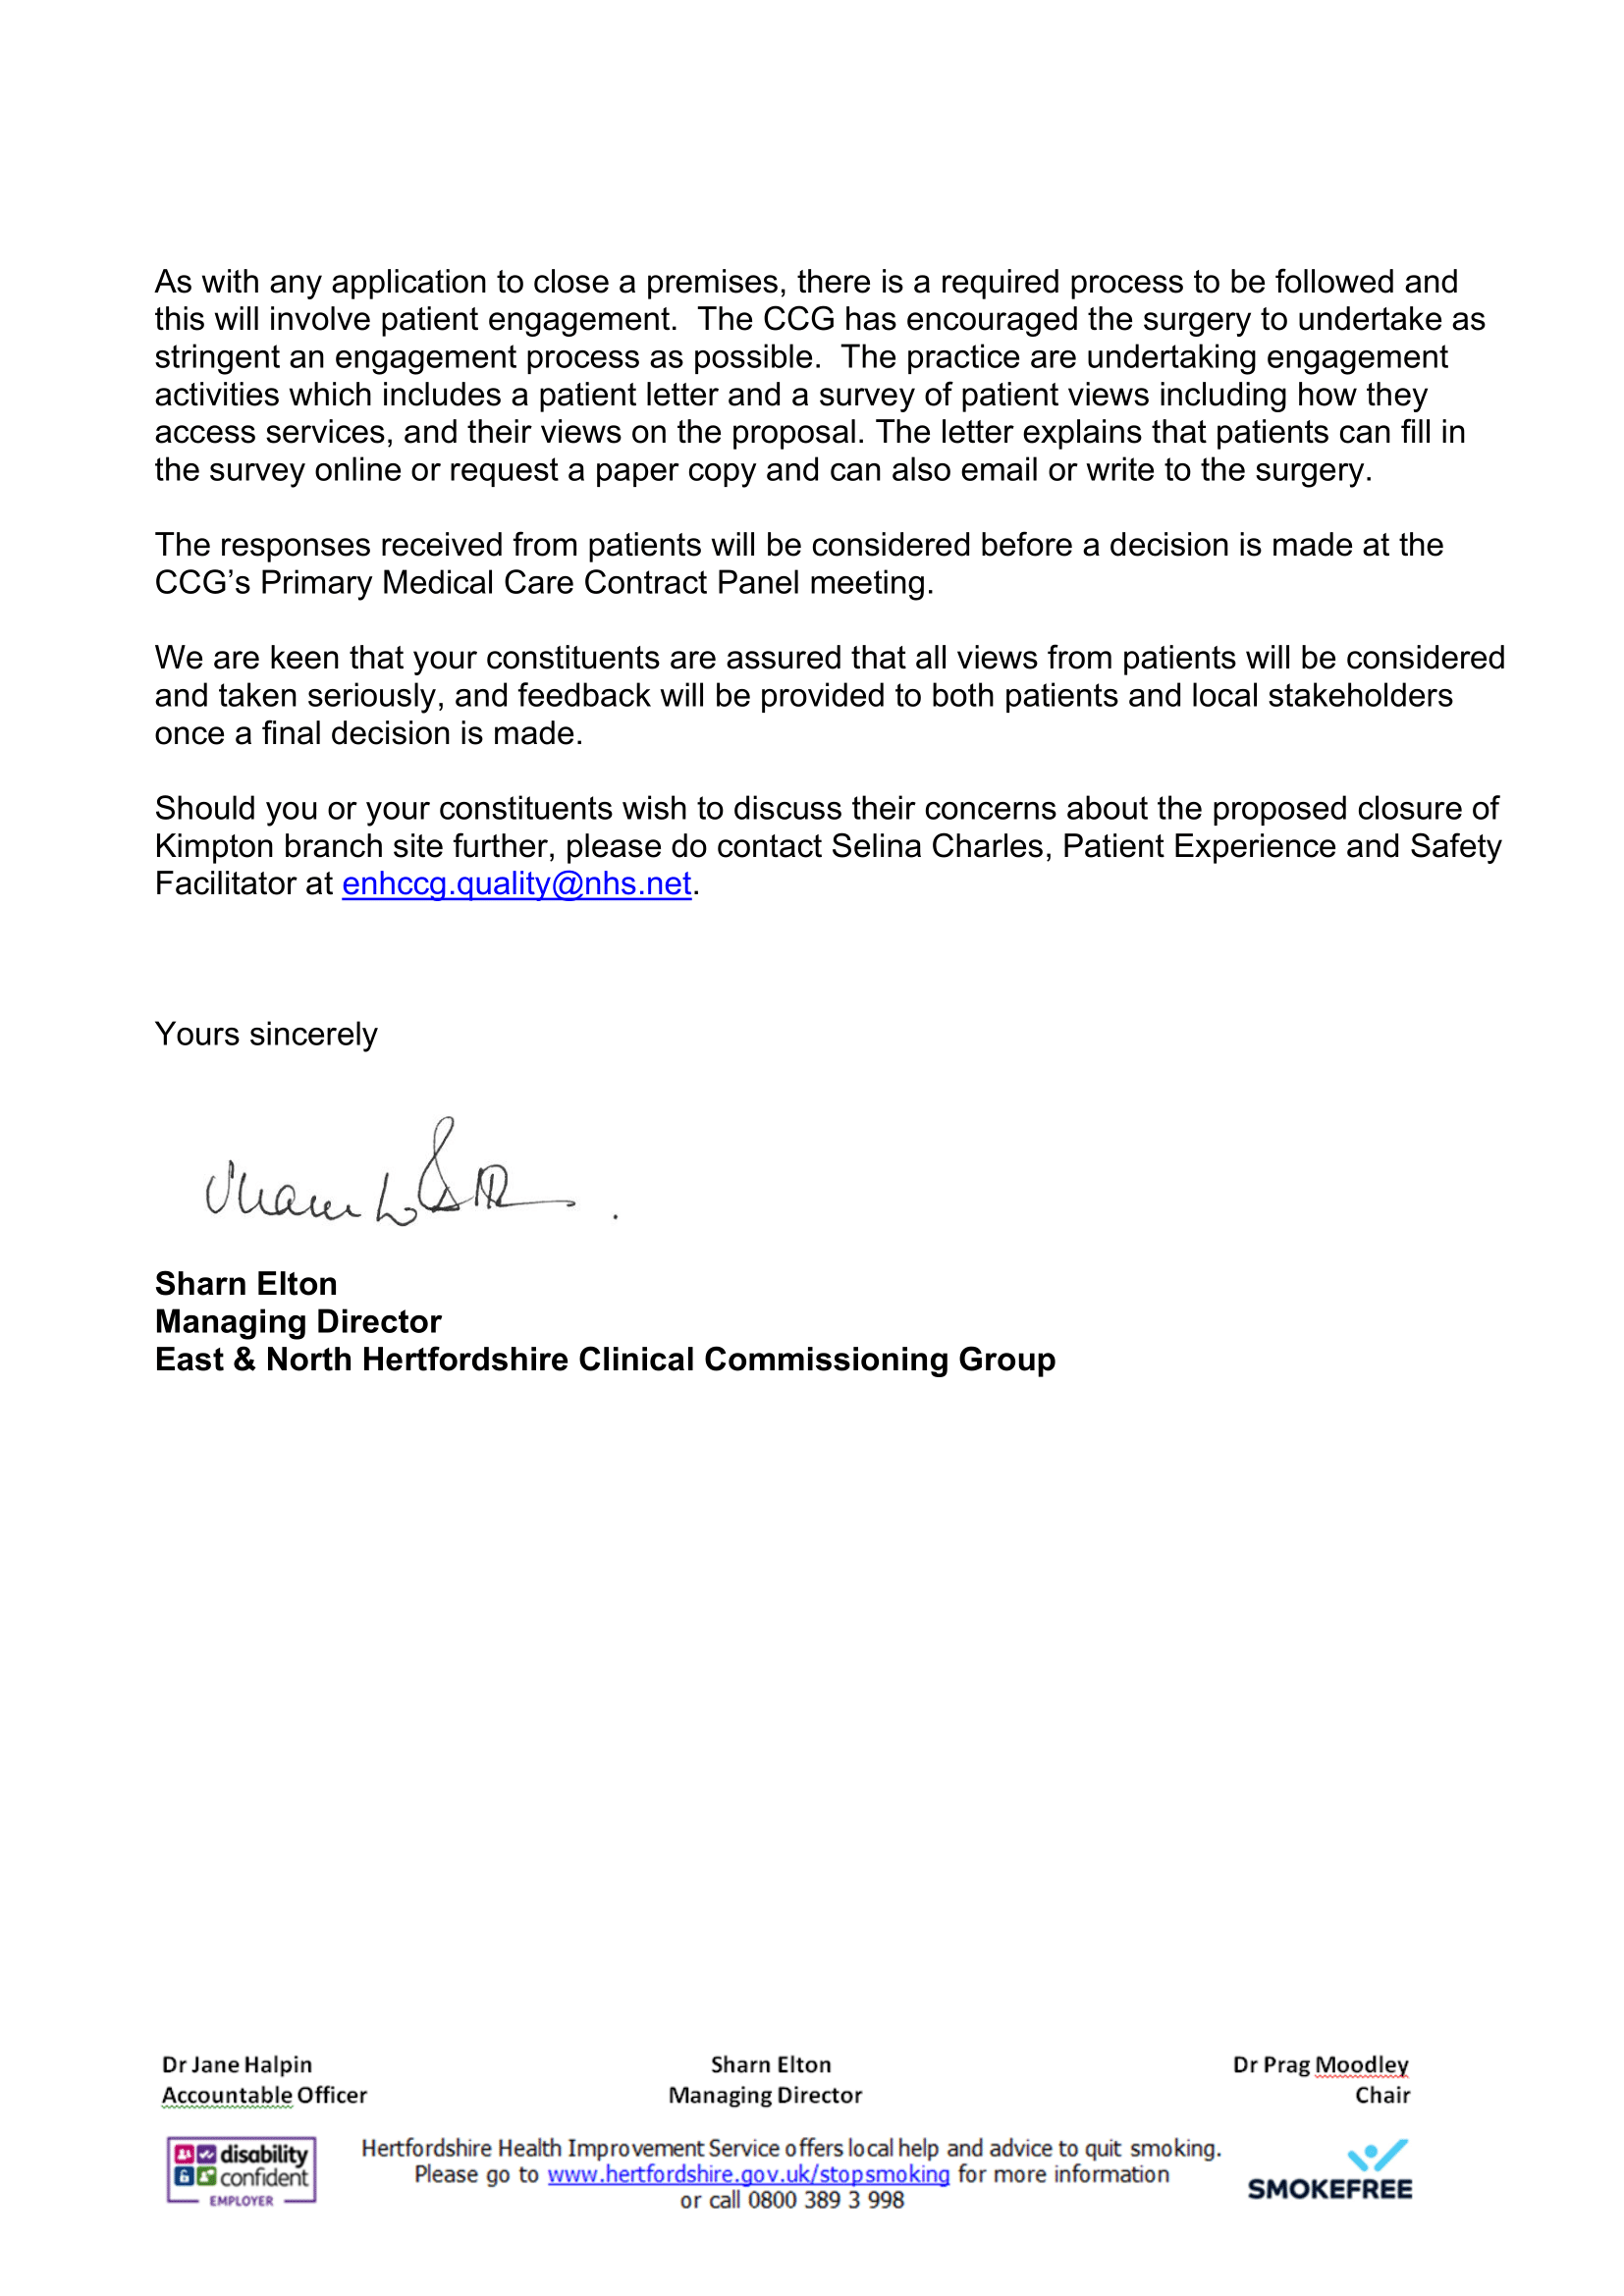 Letter from the surgery